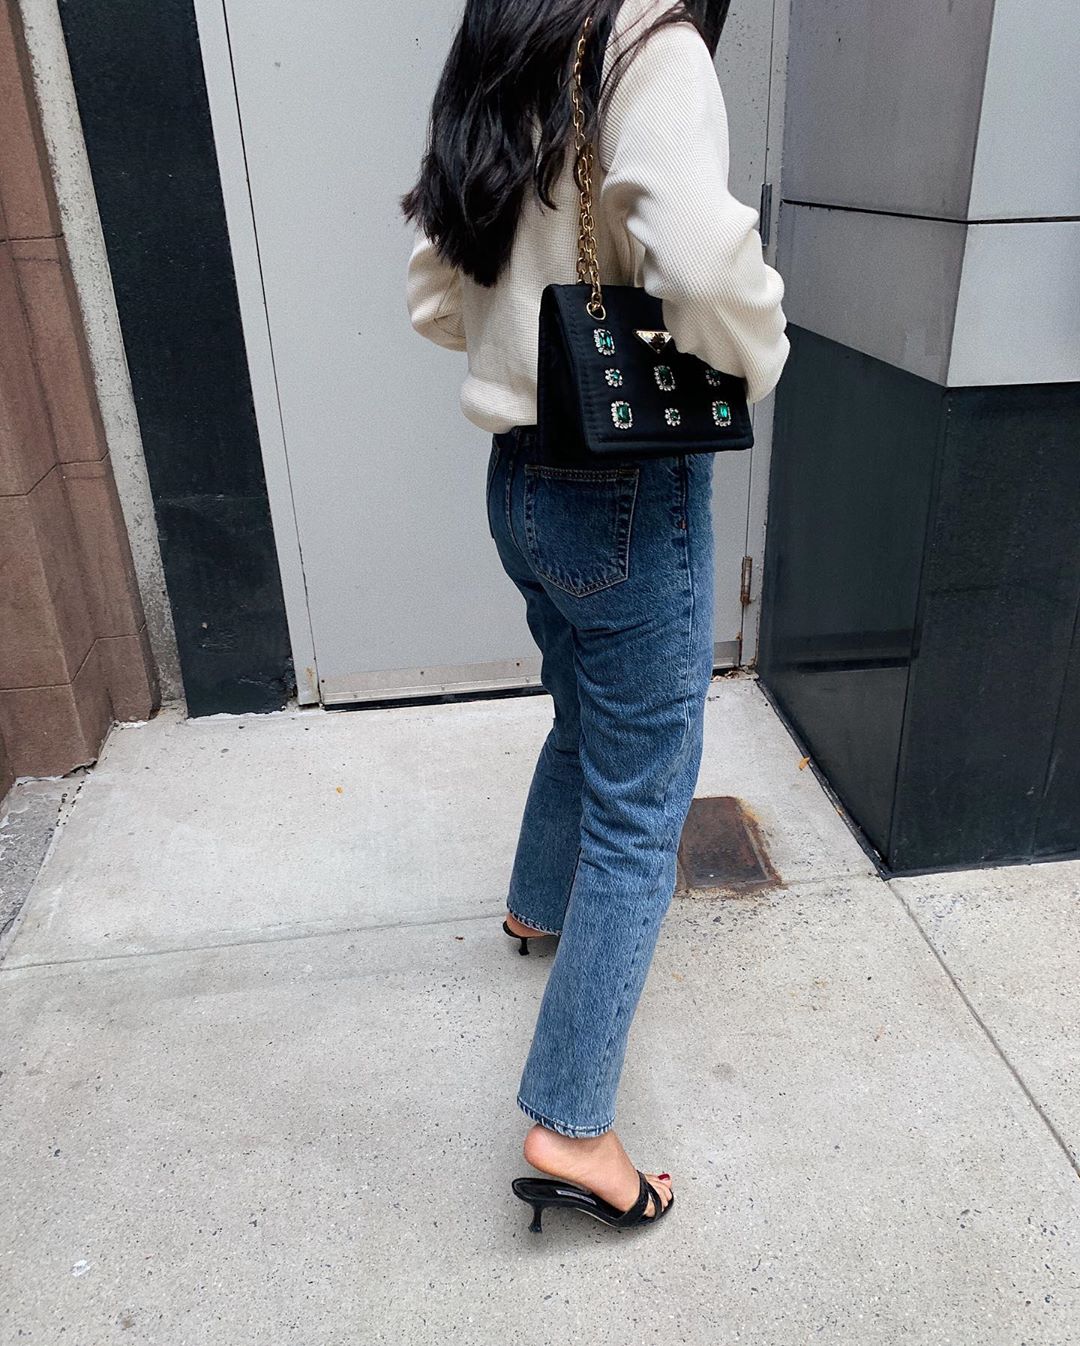 Le Fashion: The Jeans We're Buying This Season